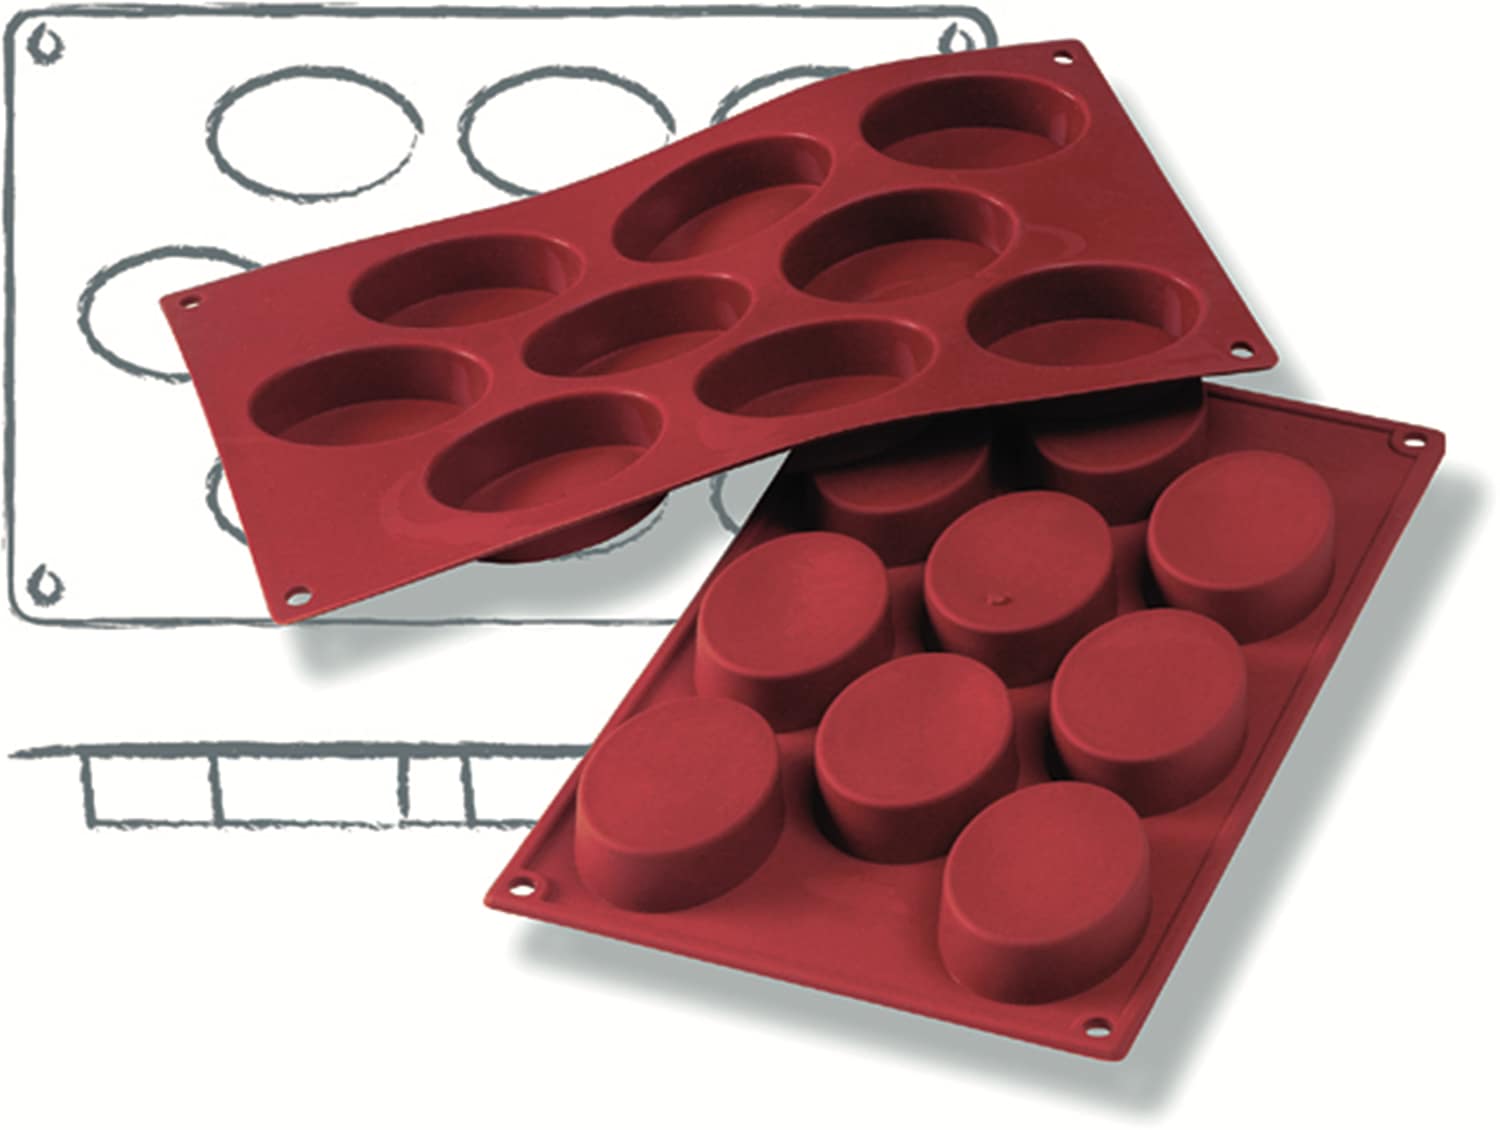 Silicone baking mould "Oval" 300 x 175 mm